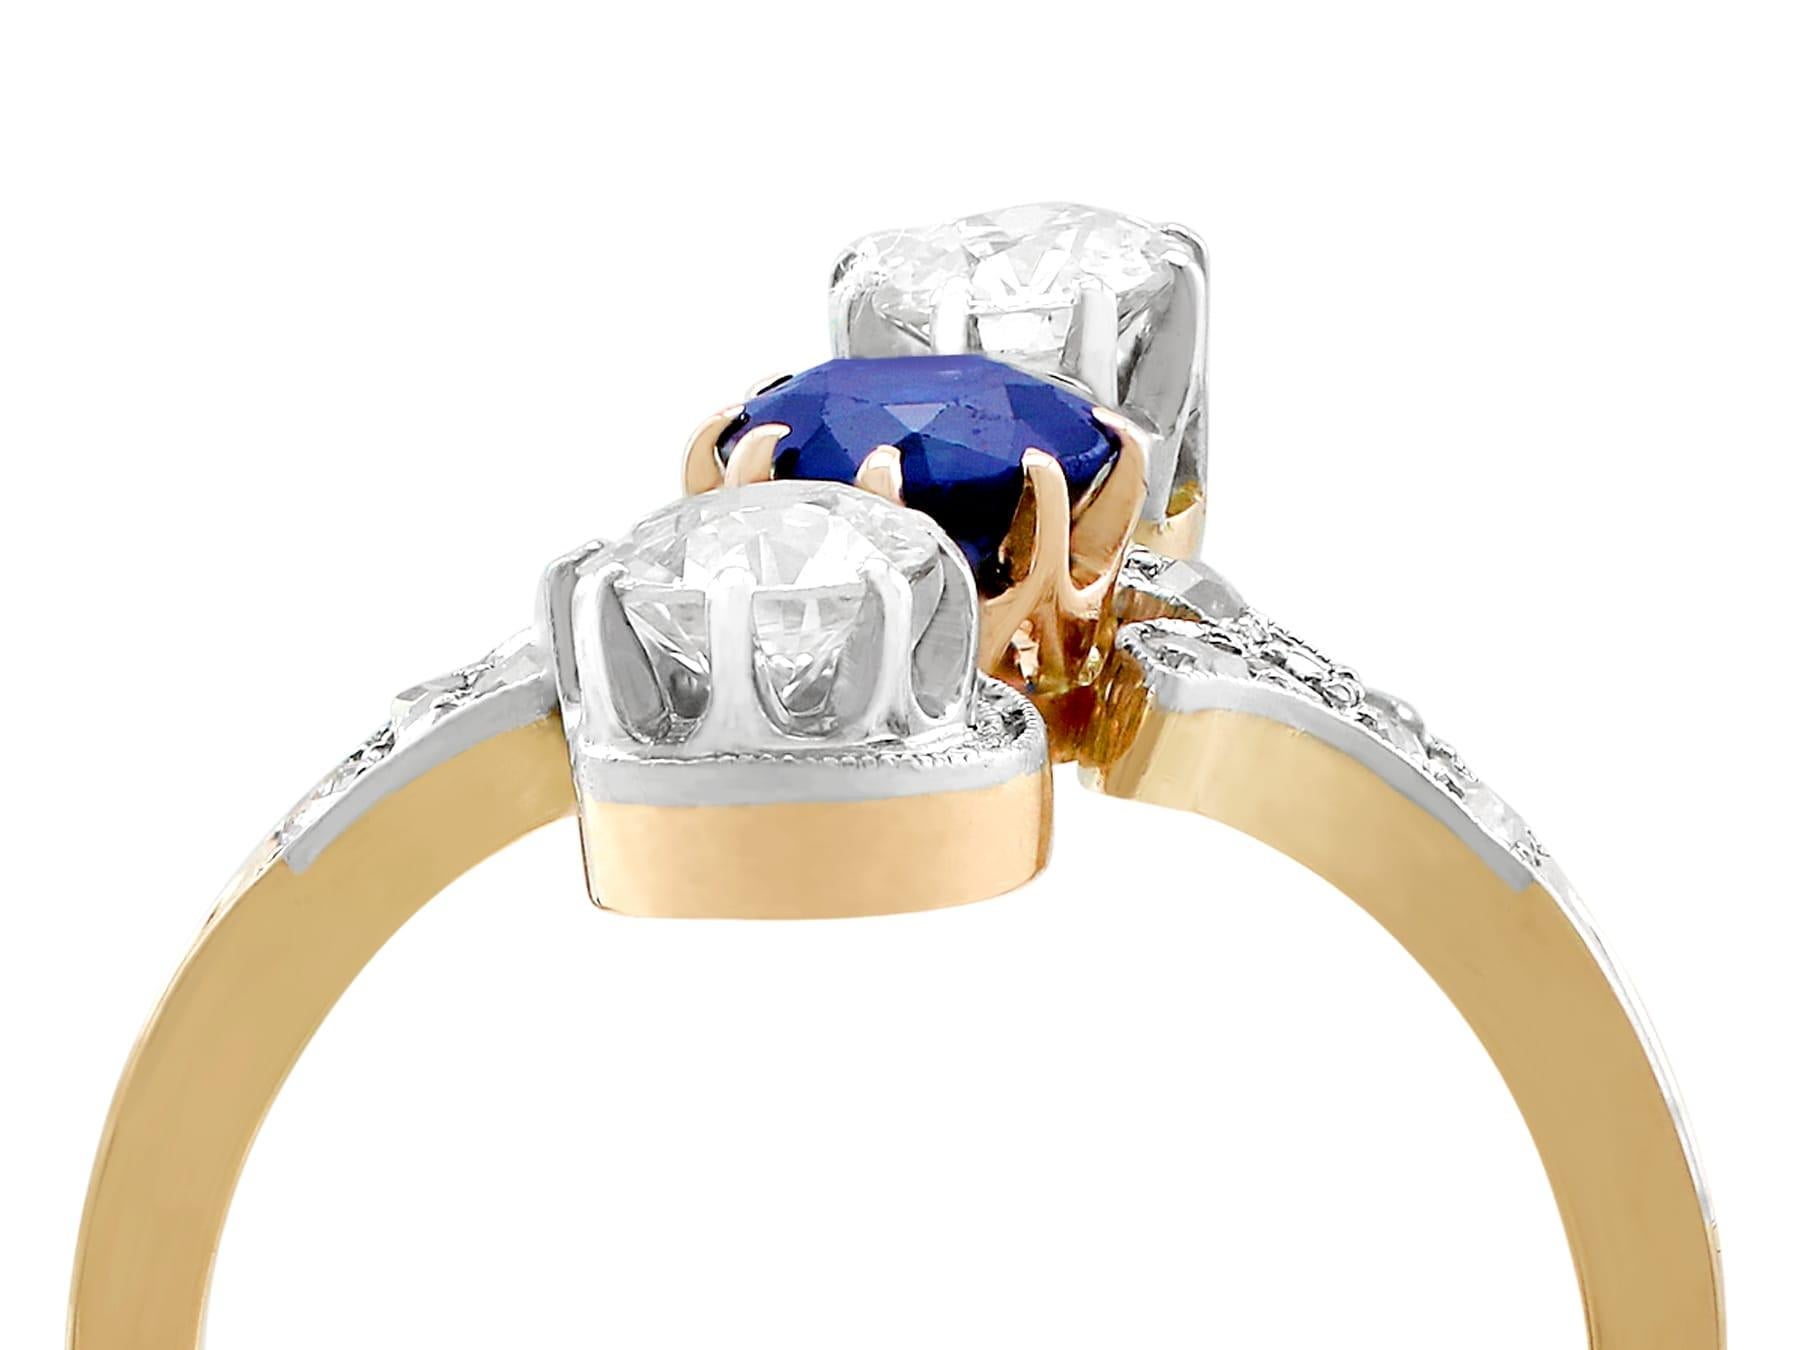 A stunning antique 0.62 carat sapphire and 1.21 carat diamond, 14 karat yellow and white gold twist ring; part of our diverse antique jewelry and estate jewelry collections.

This stunning, fine and impressive antique sapphire ring has been crafted